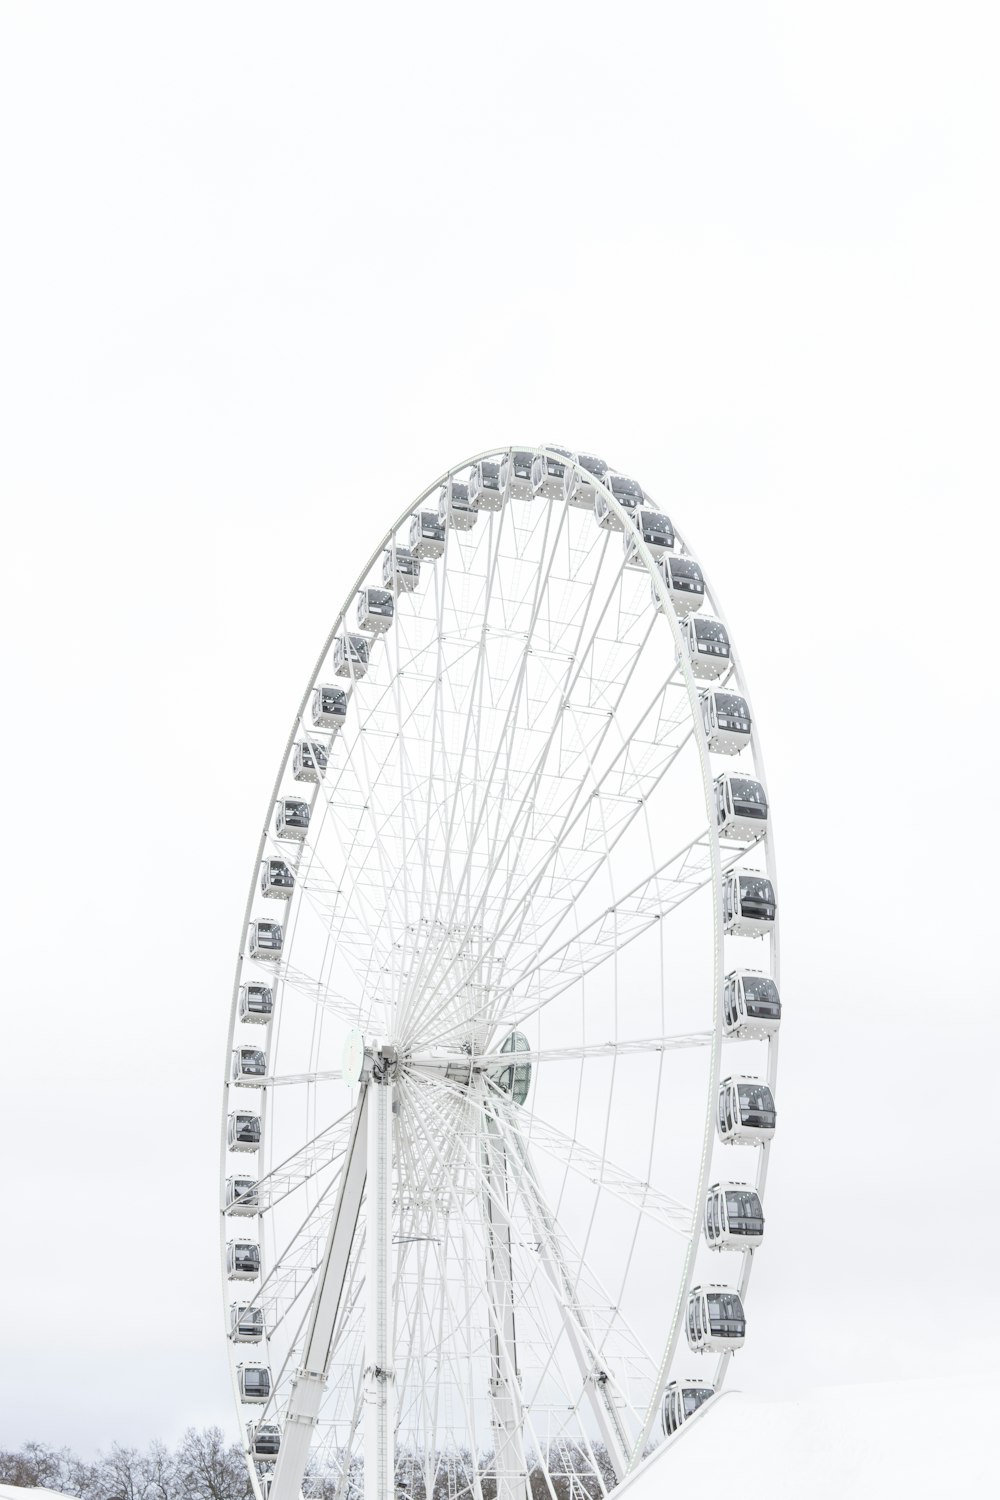 a large ferris wheel sitting in the middle of a snow covered field